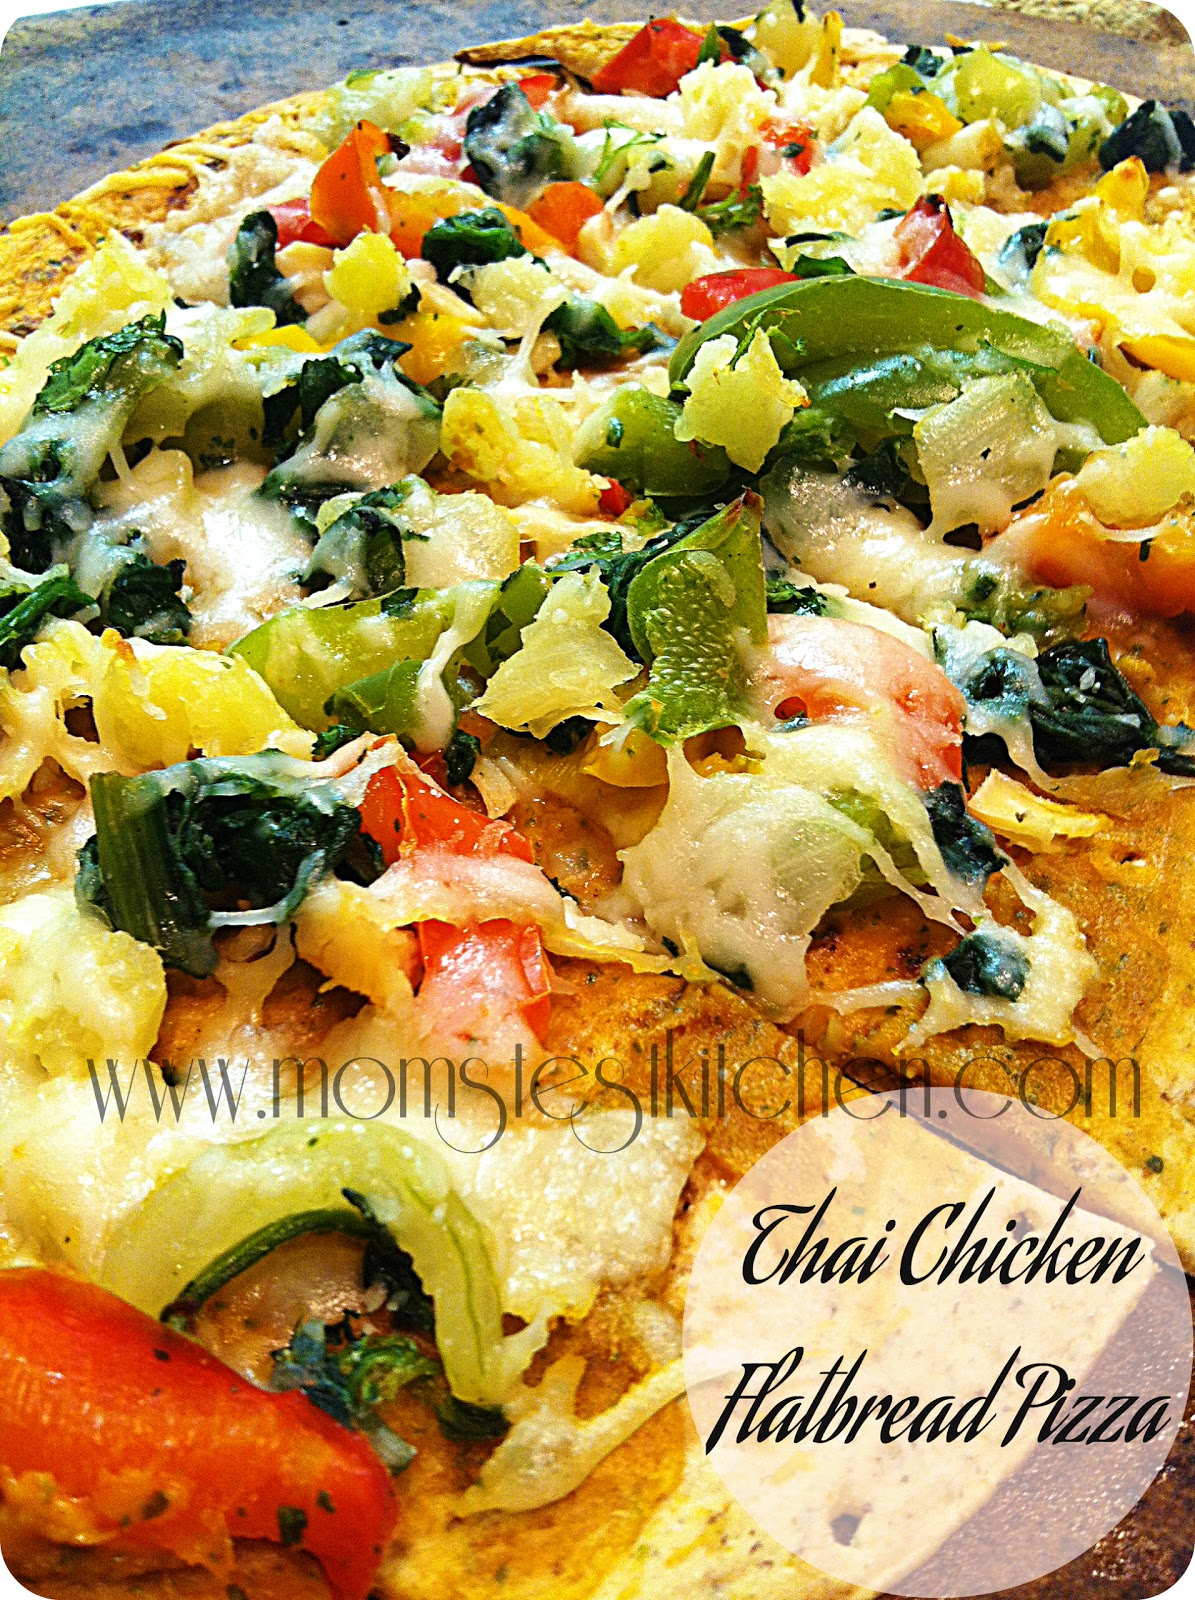 Frugal Foodie Mama: ~Thai Chicken Flatbread Pizza~ A Guest Recipe from ...